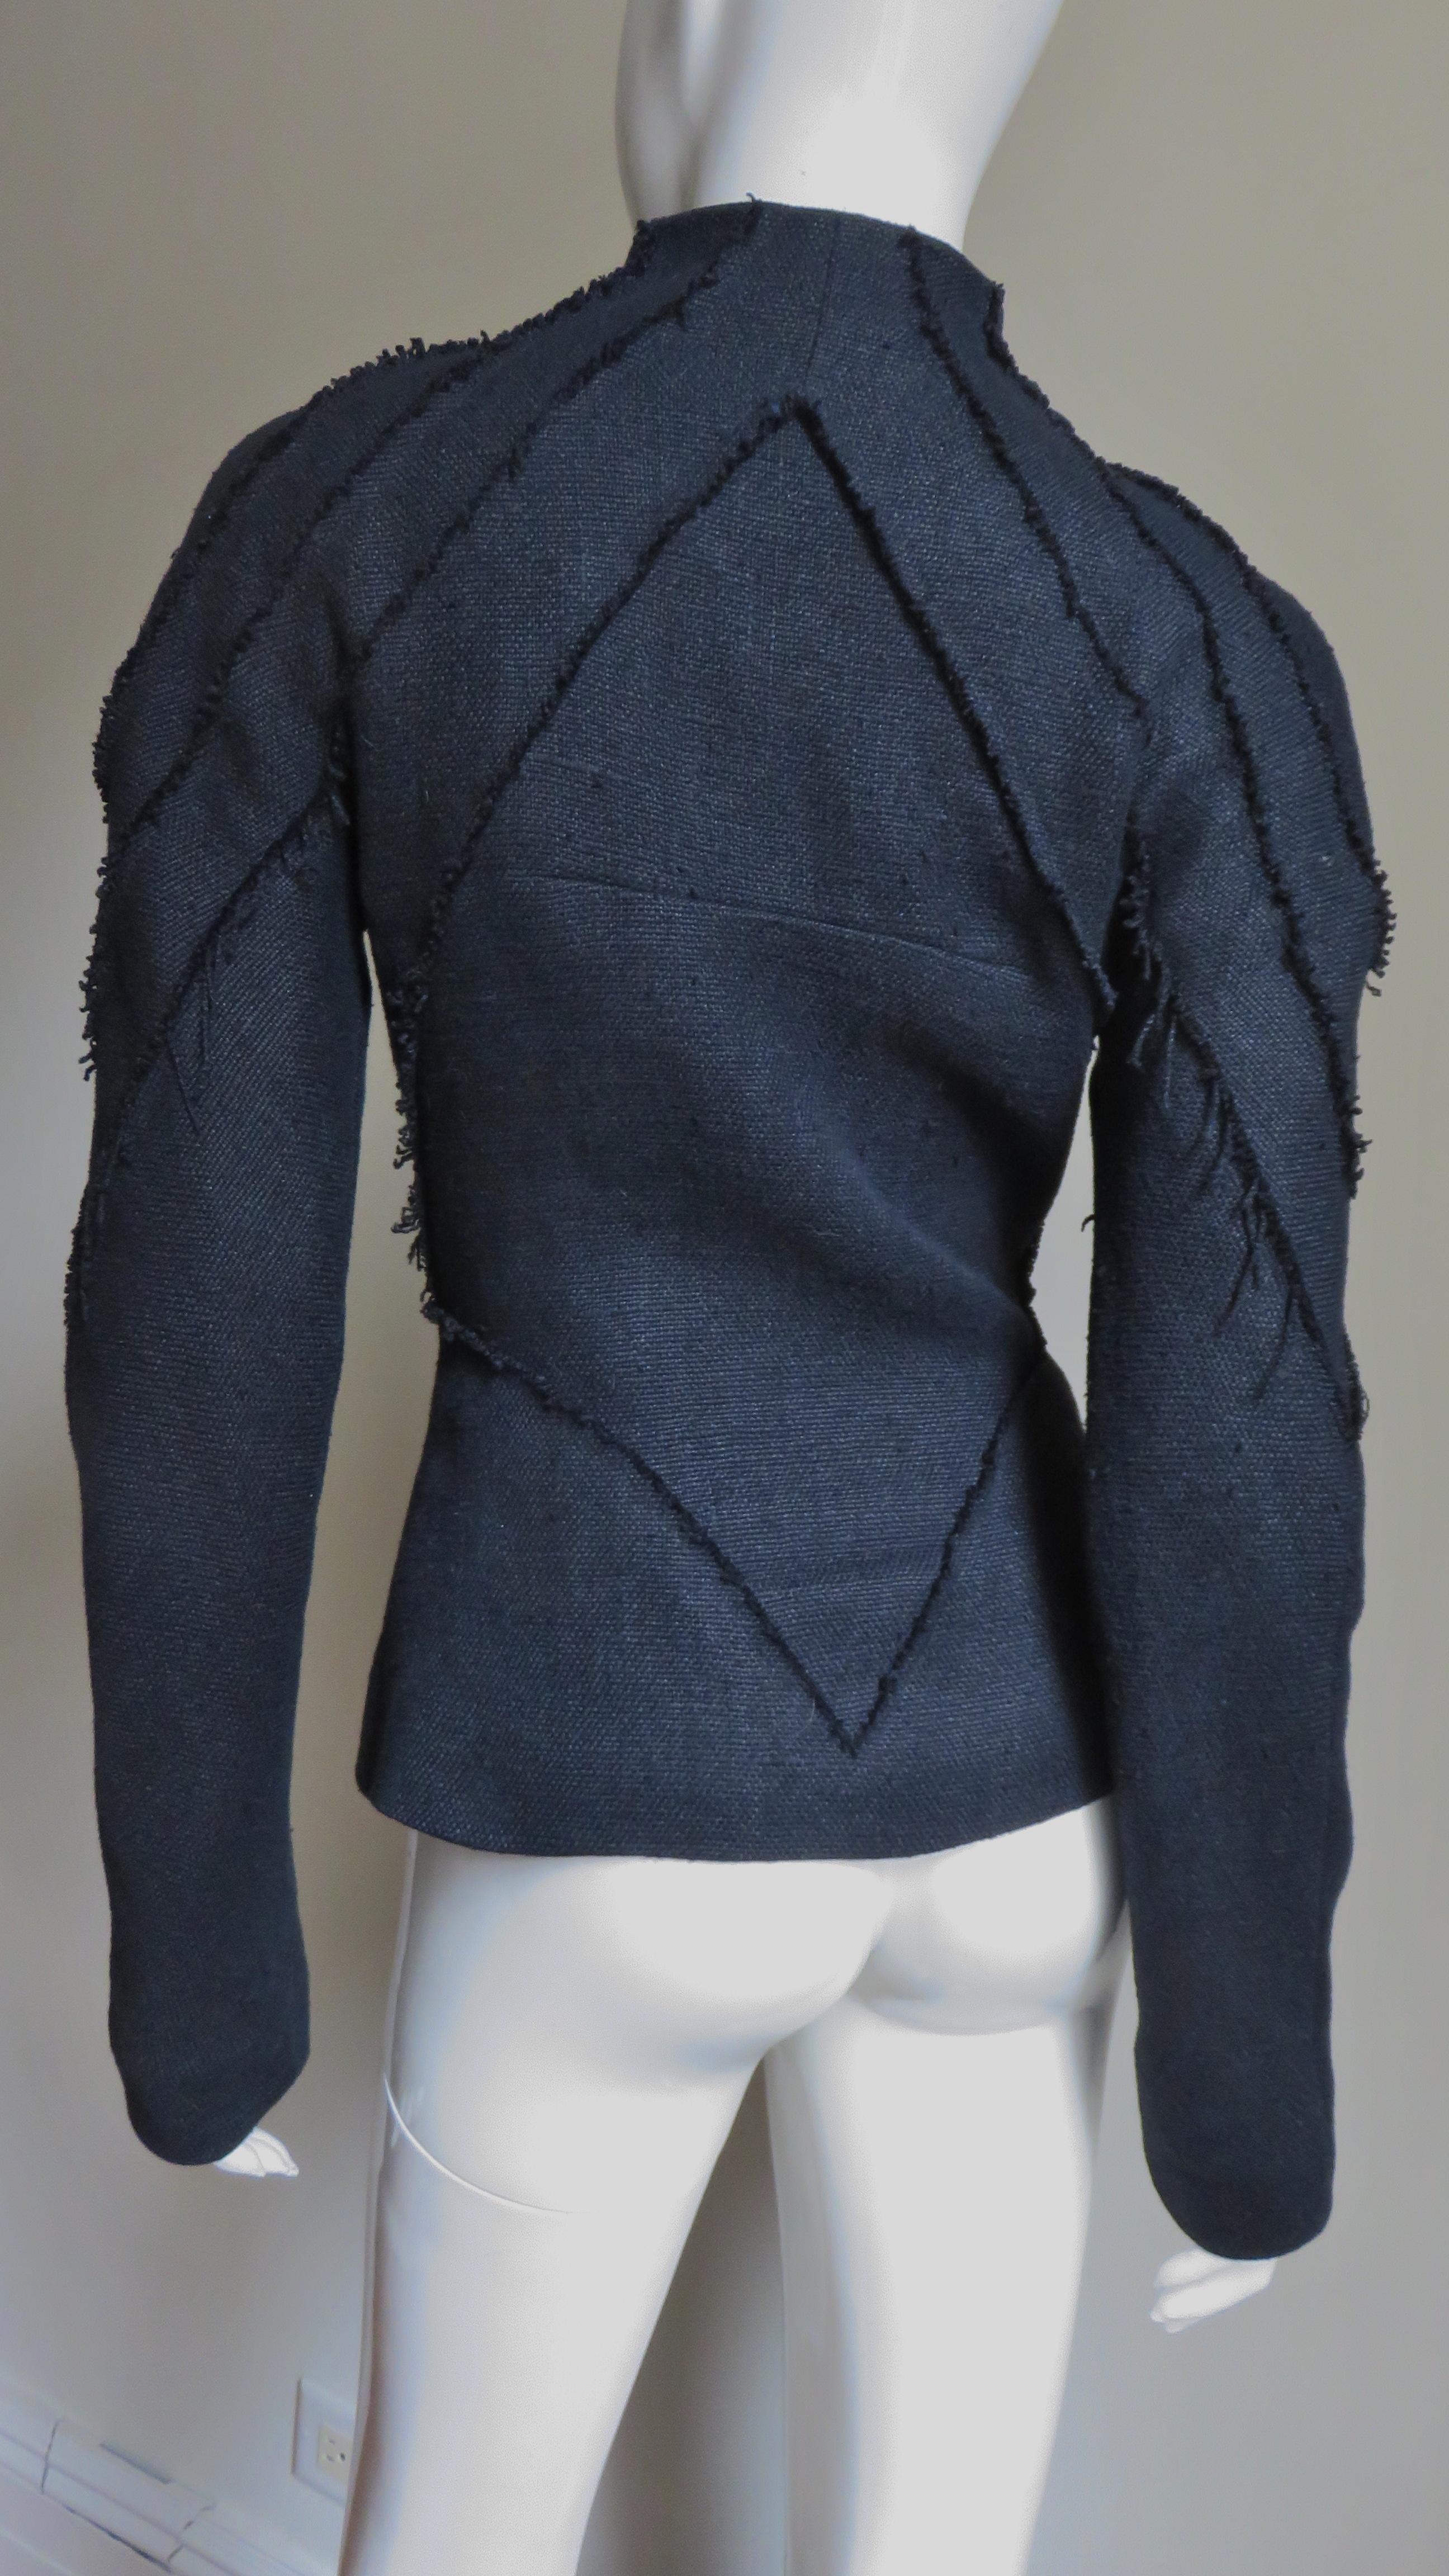 Alexander McQueen New Elaborately Seamed Jacket and Pants A/W 1999 For Sale 7